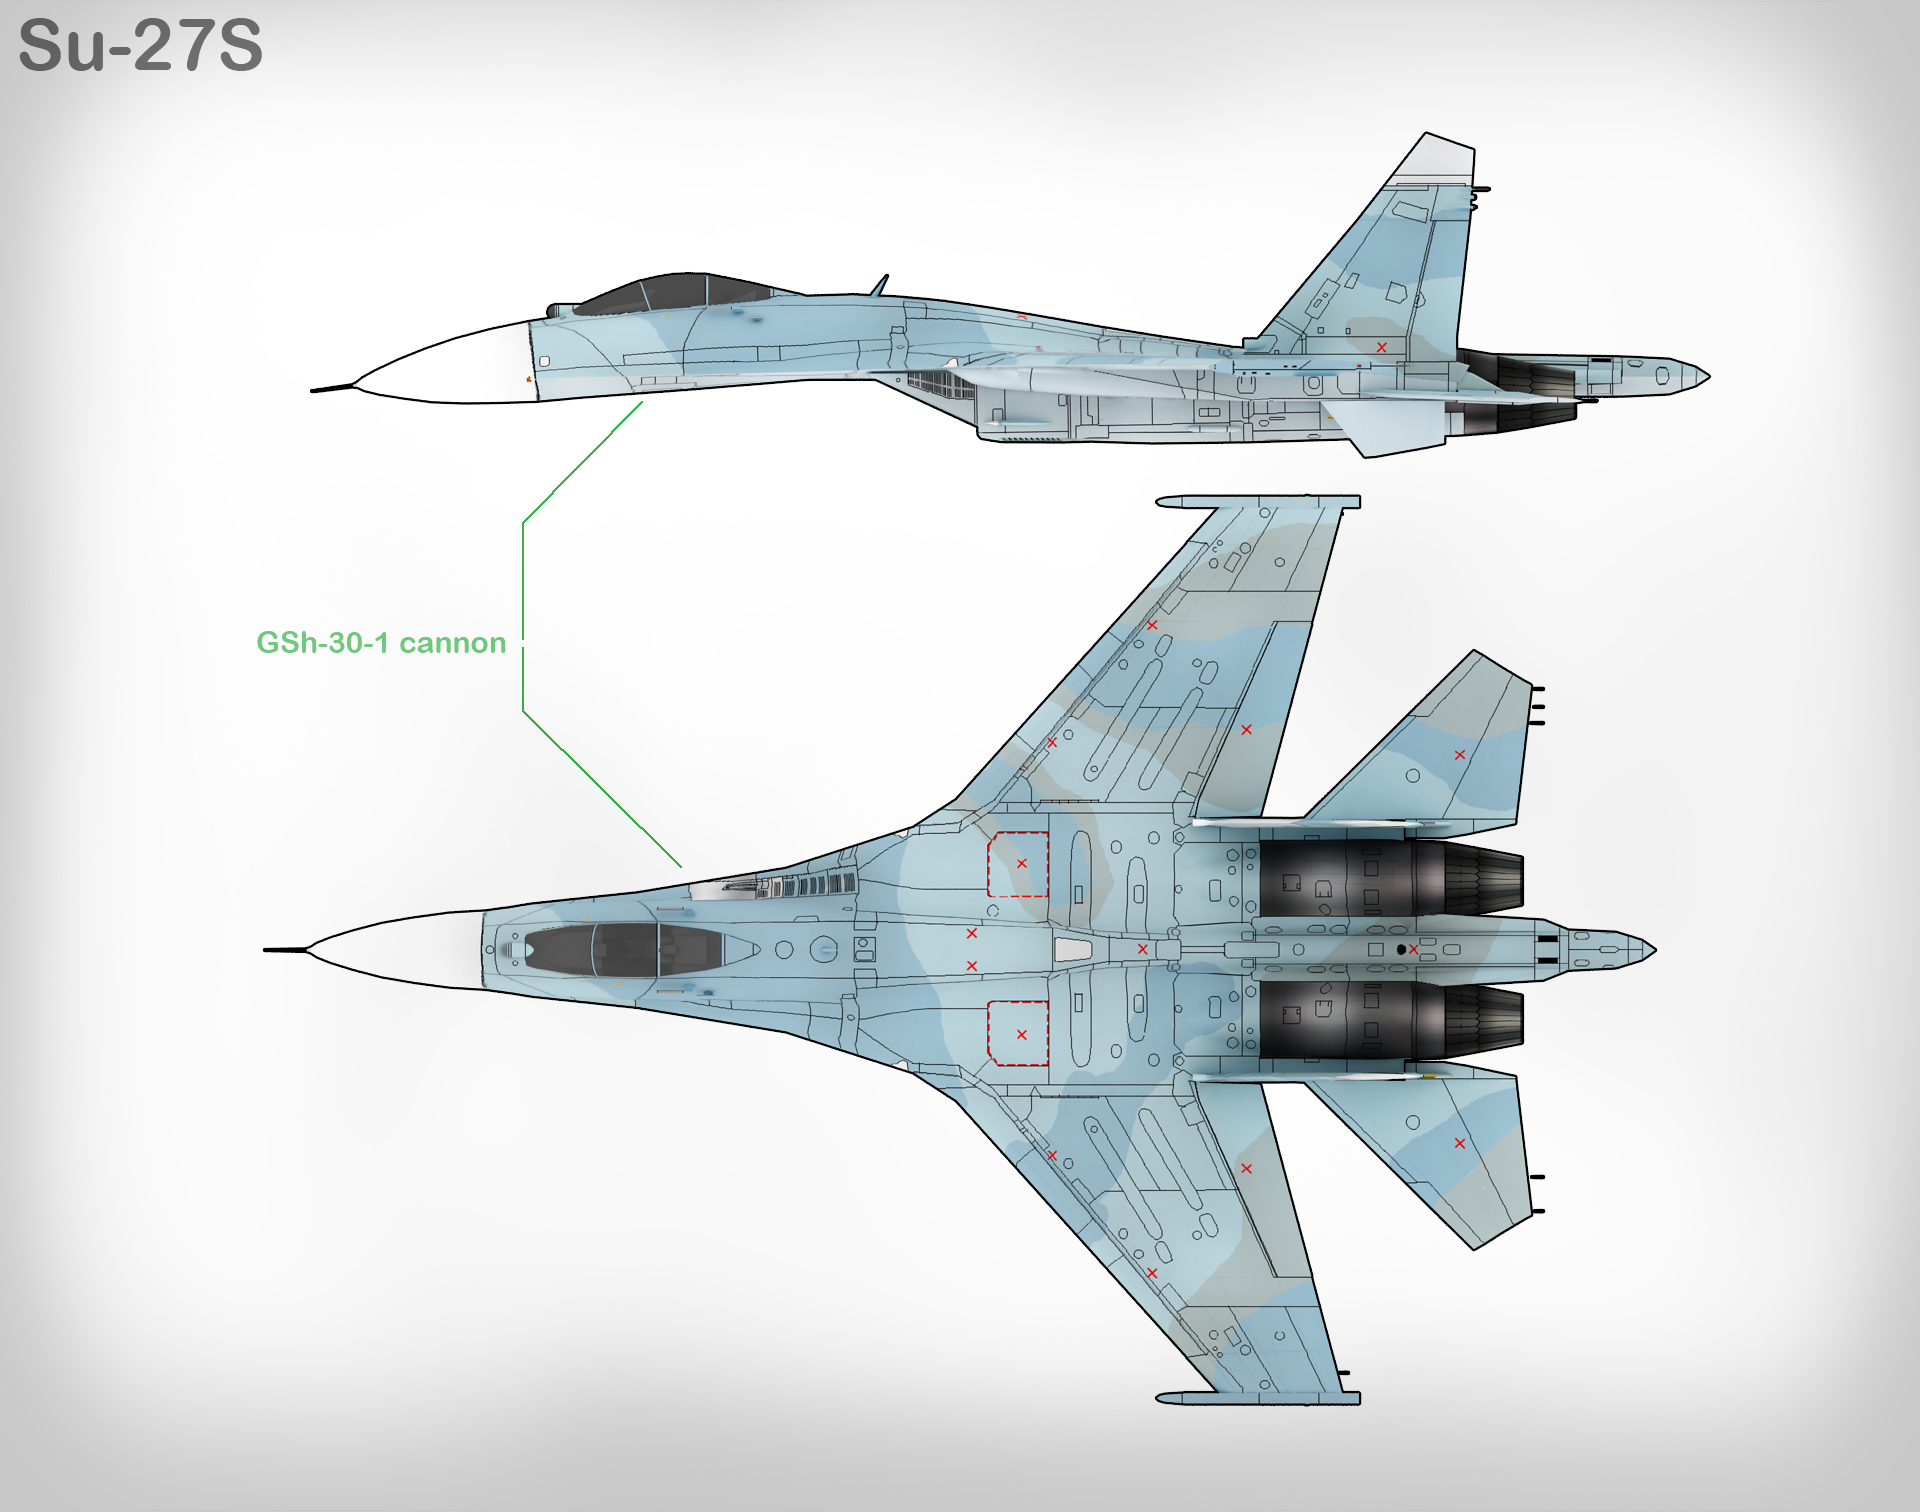 Other unit that was selected for his mission was the su-27s